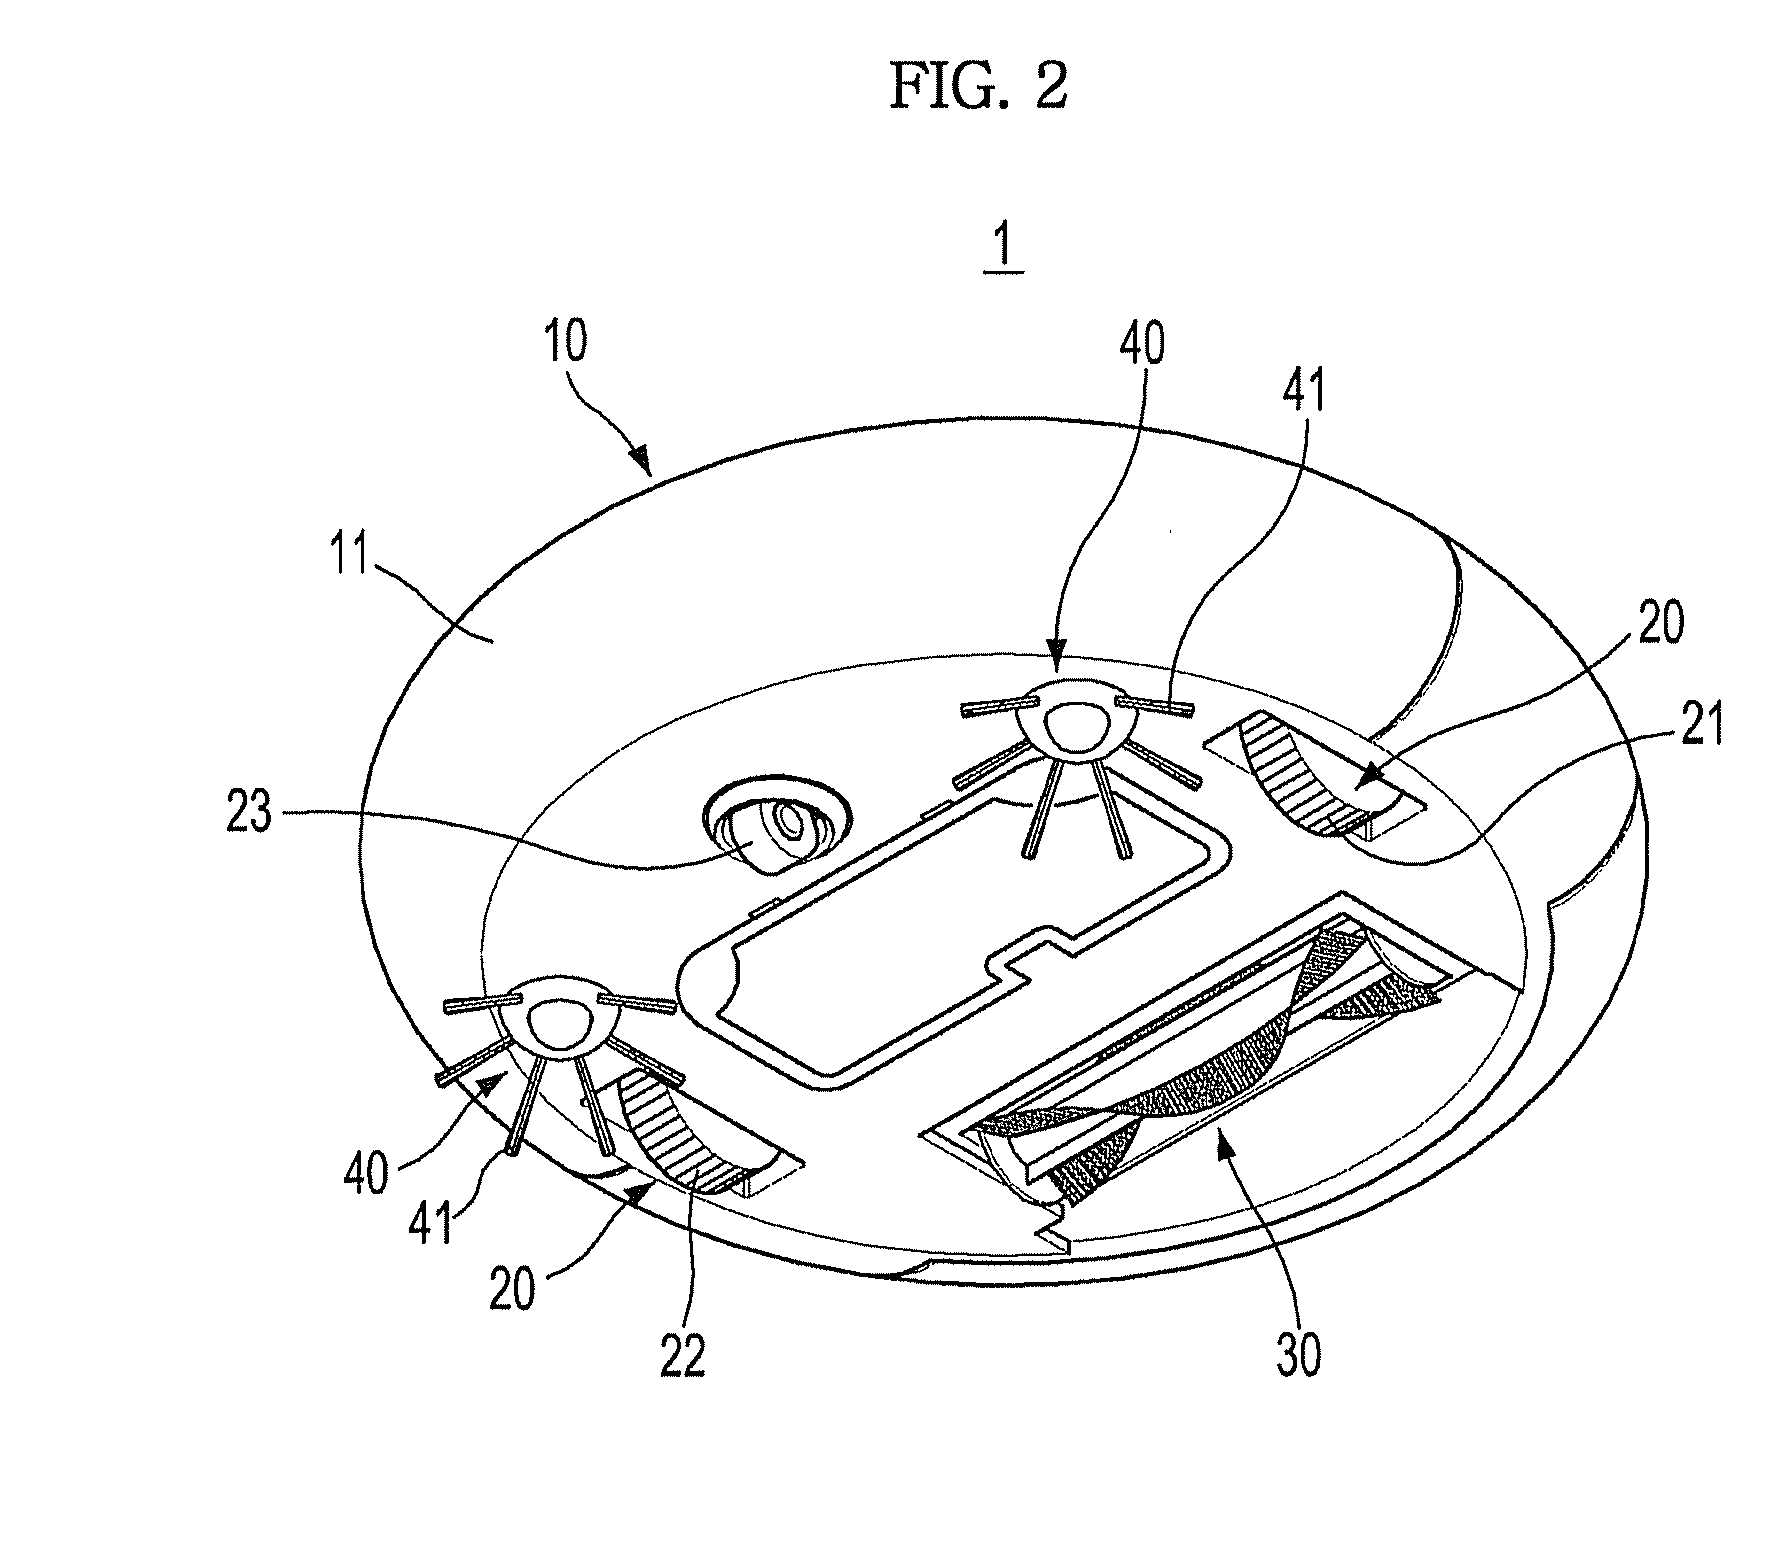 Robot cleaner and method of controlling traveling thereof